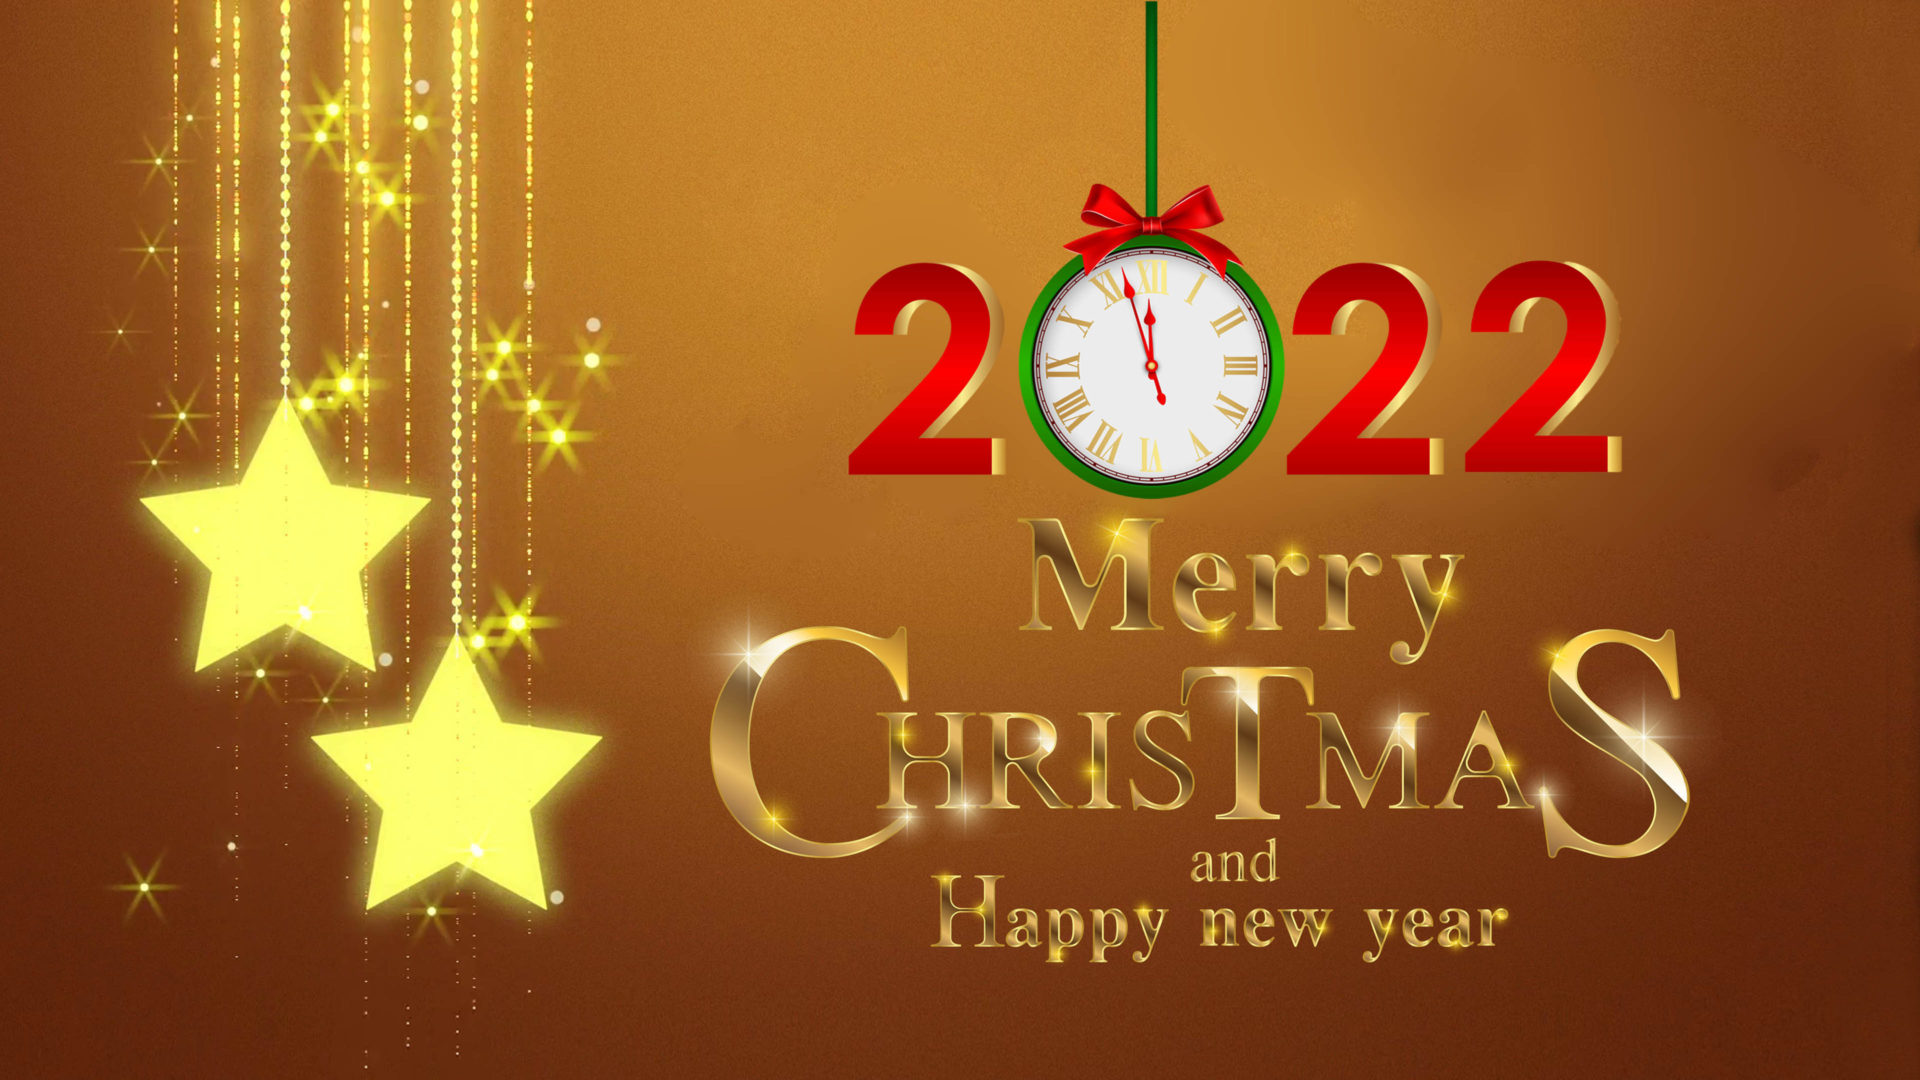 Merry Christmas And Happy New Year 2022 Gold 4k Ultra HD Desktop Wallpaper For Computers Laptop Tablet And Mobile Phones, Wallpaper13.com